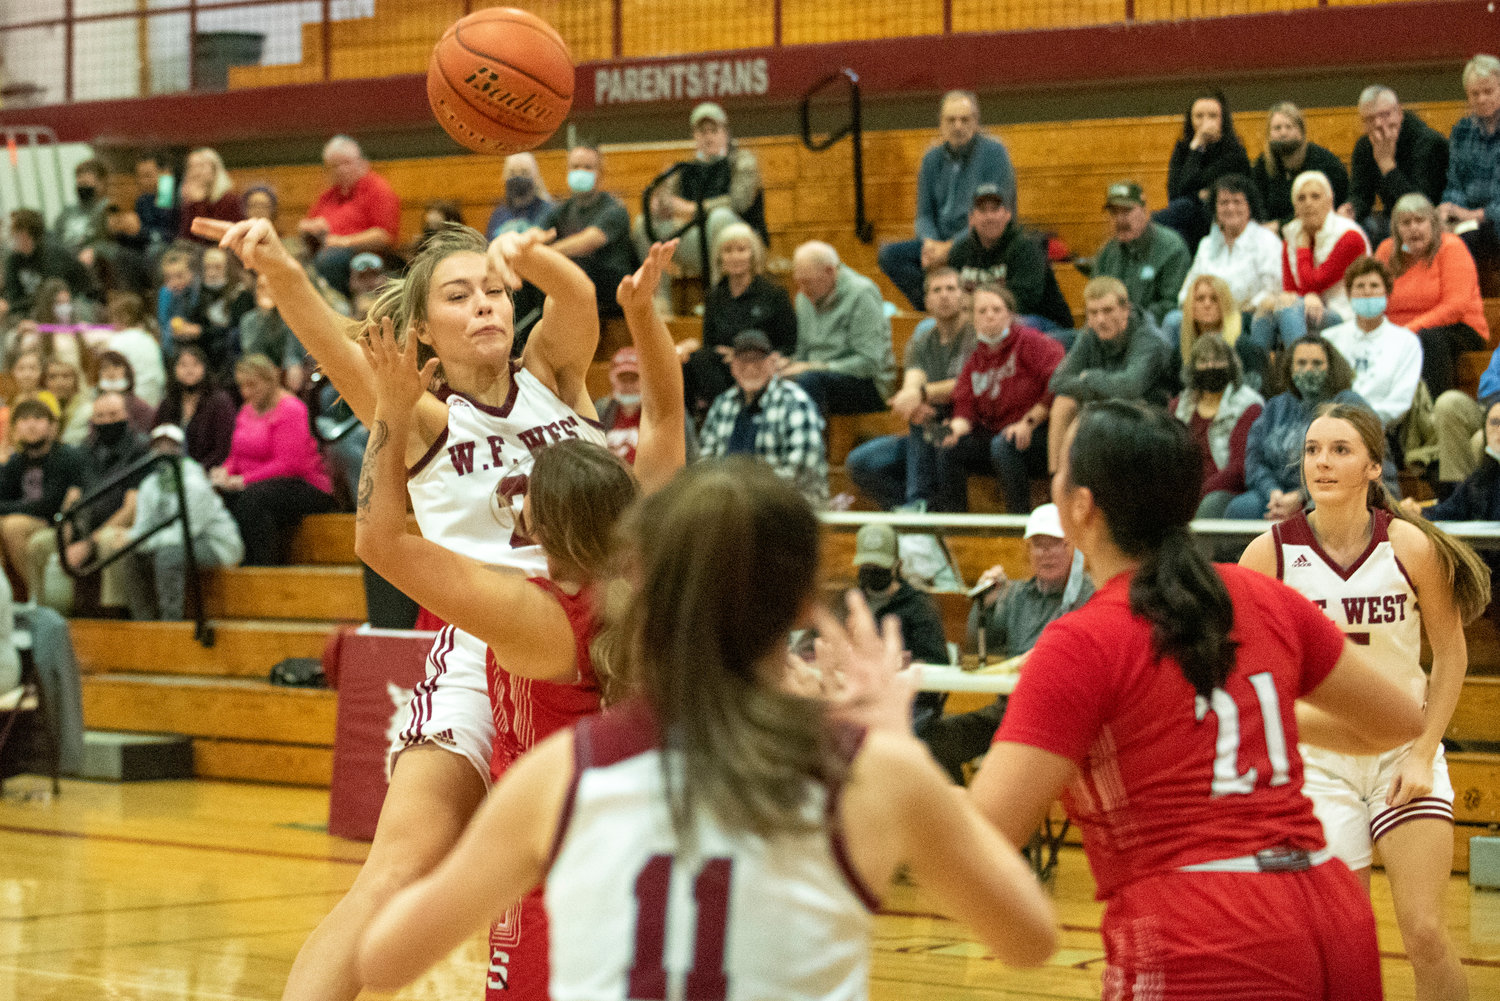 W.F. West's Kyla McCallum (25) dishes off a pass to Olivia Remund (11) against Shelton on Dec. 7.